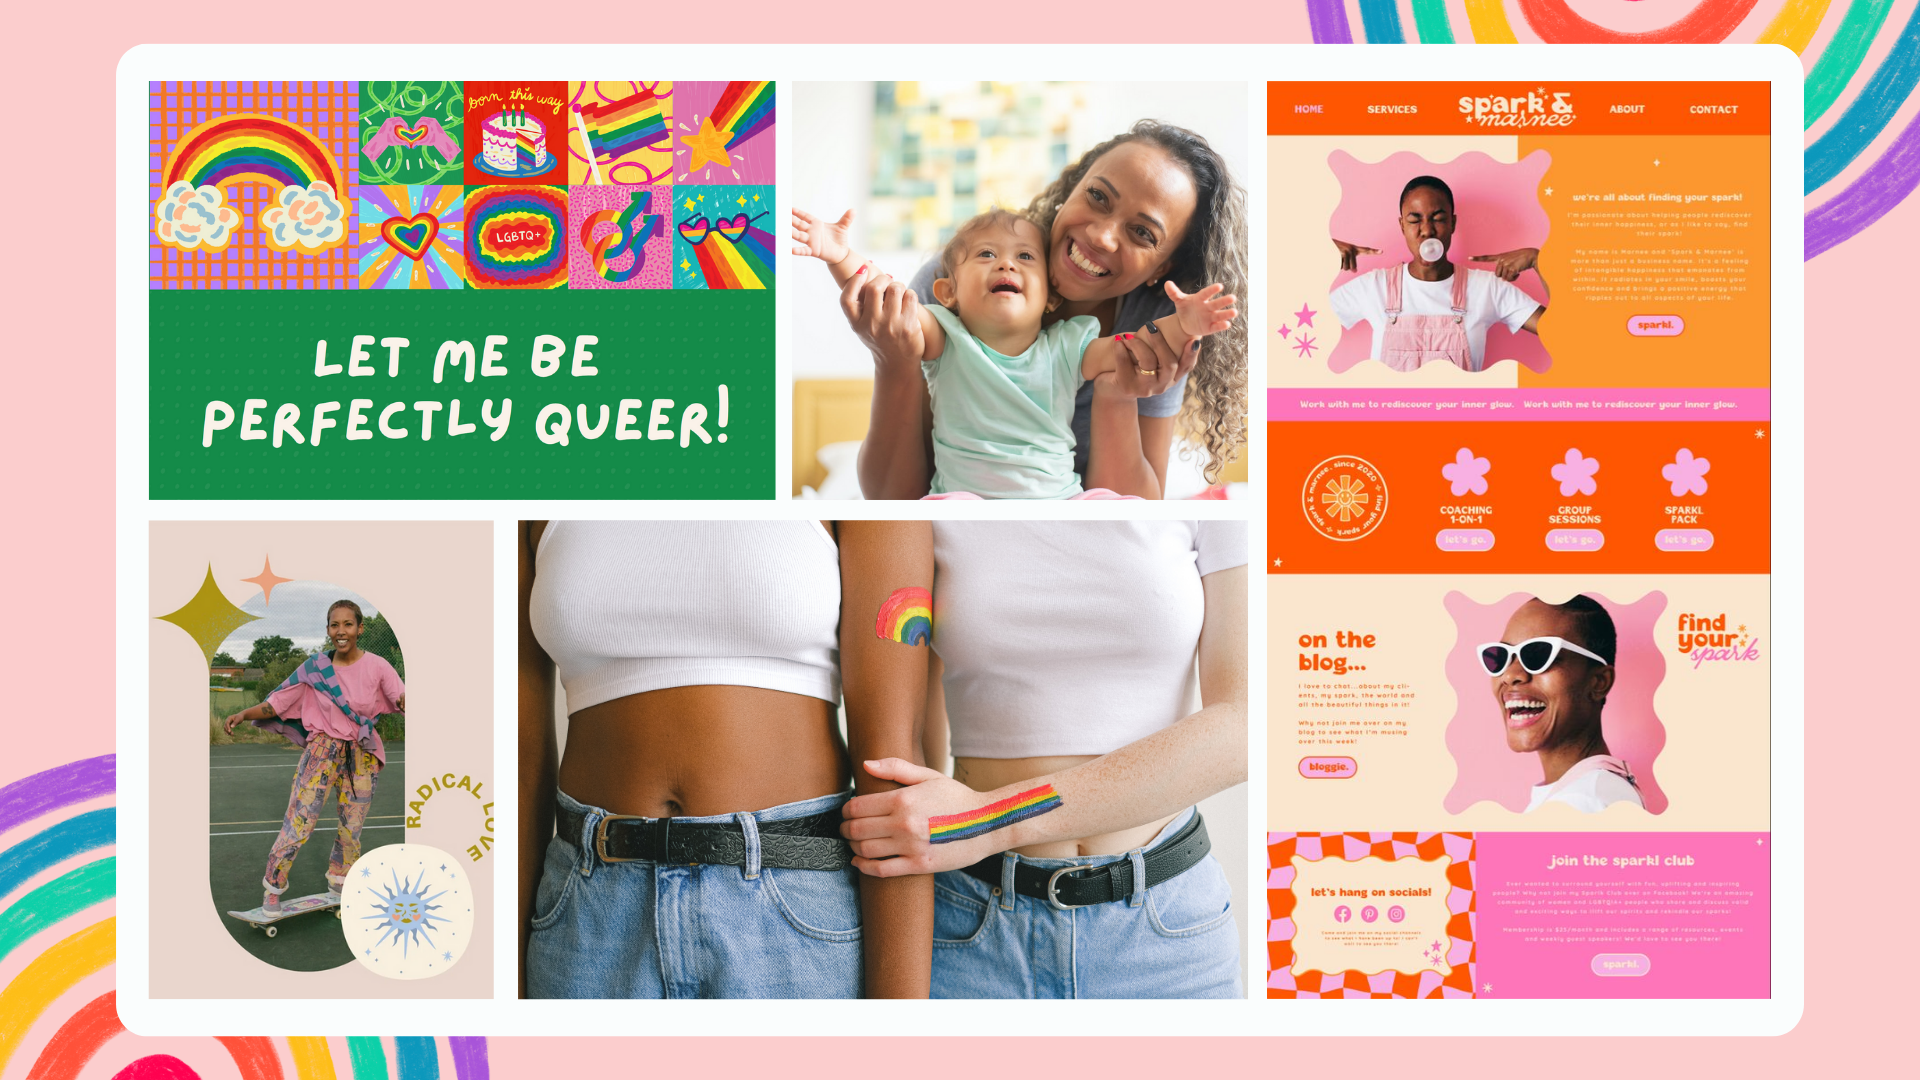 Collage of colorful images portraying diversity and queerness